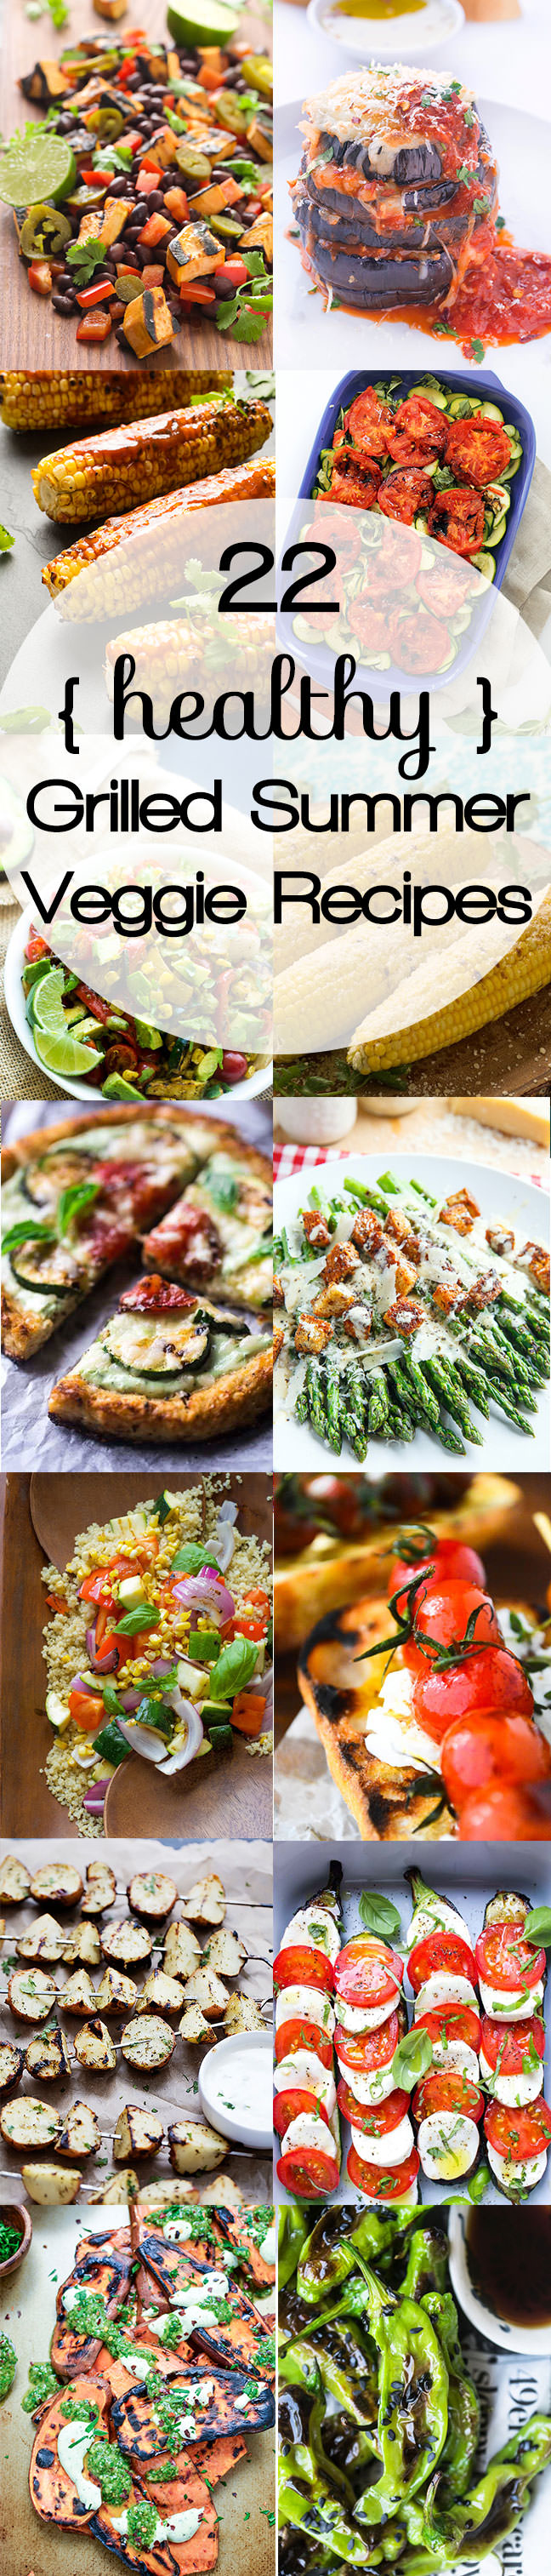 Take the entire dinner outside with these fired up side dishes! Everything from grilled potatoes, salads and even eggplant parmesan! So skip that oven and head to the grill!